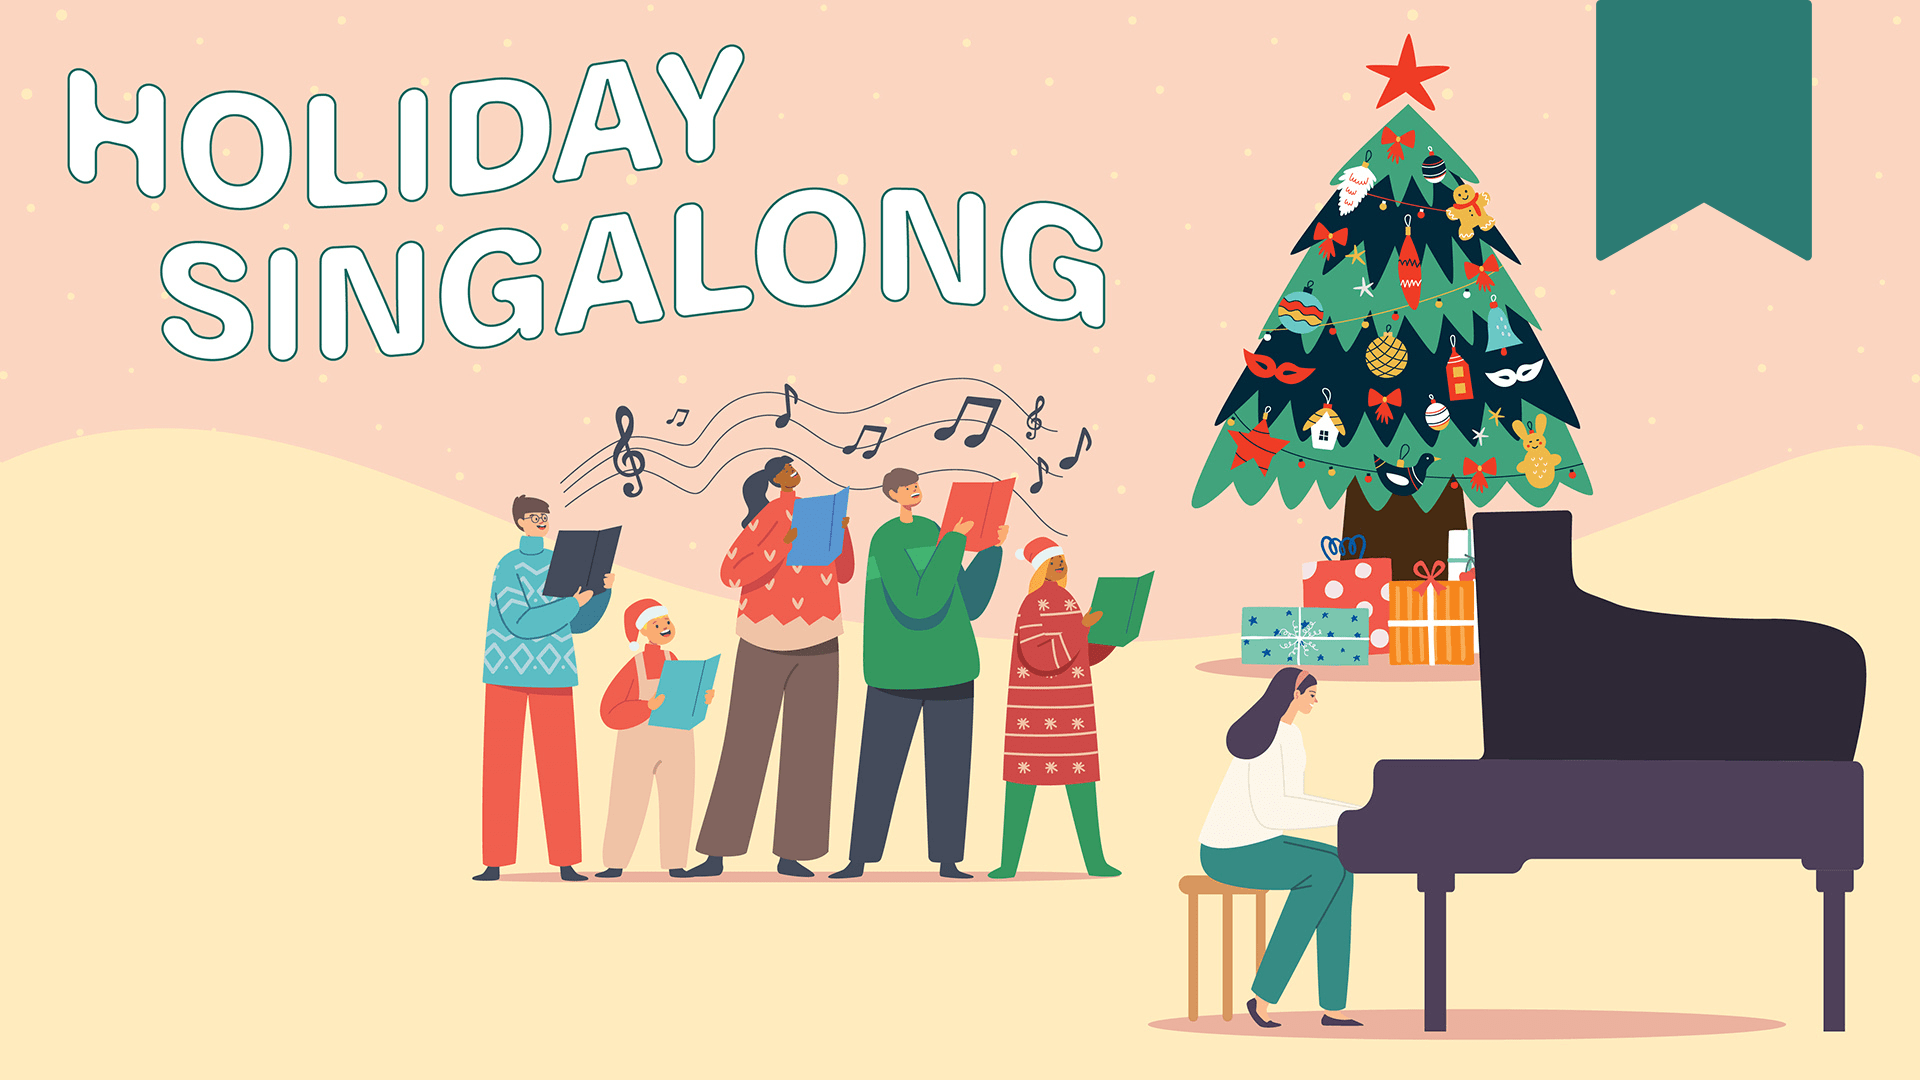 A banner with the words, "Holiday Singalong", featuring the image of people carolling, a woman playing the piano, and a festive tree with presents underneath.